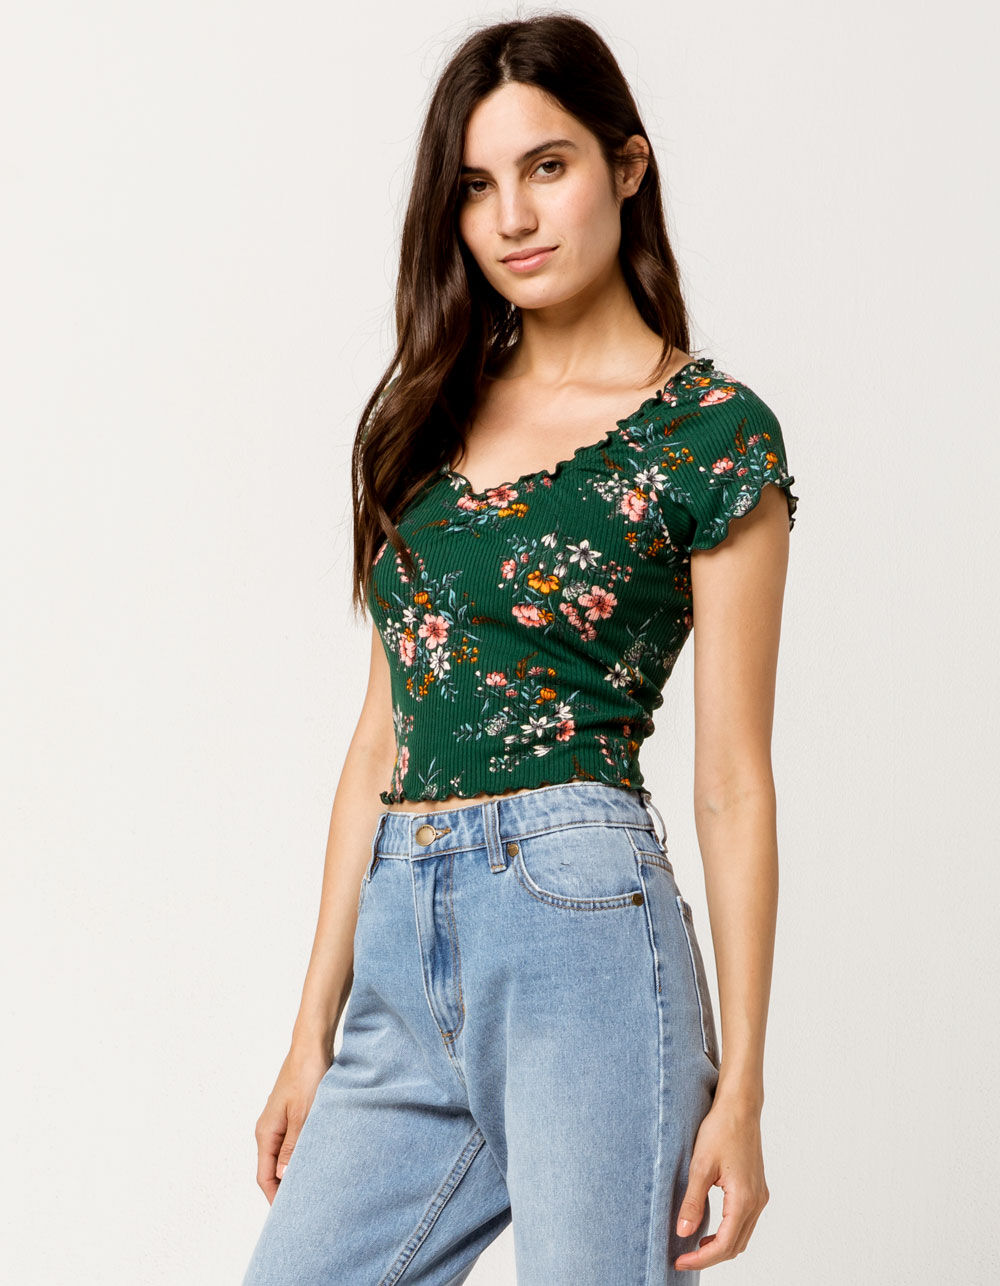 SKY AND SPARROW Floral Cinch Front Womens Crop Top - HUNTER | Tillys